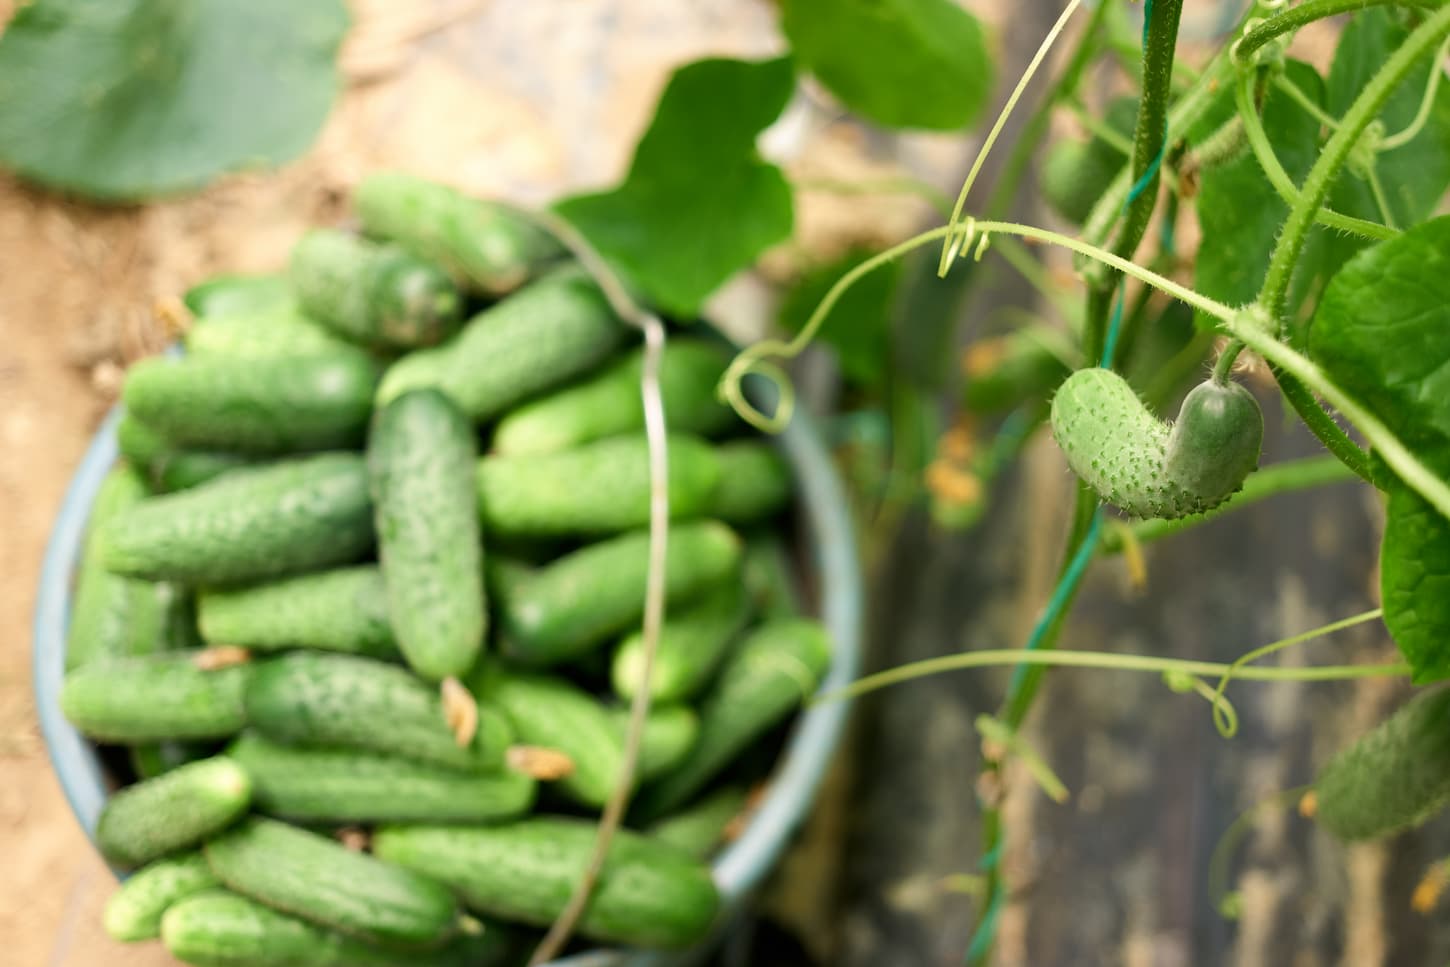 An image of a Growing cucumber on vine and a bucket with freshly picked cucumbers in the garden.